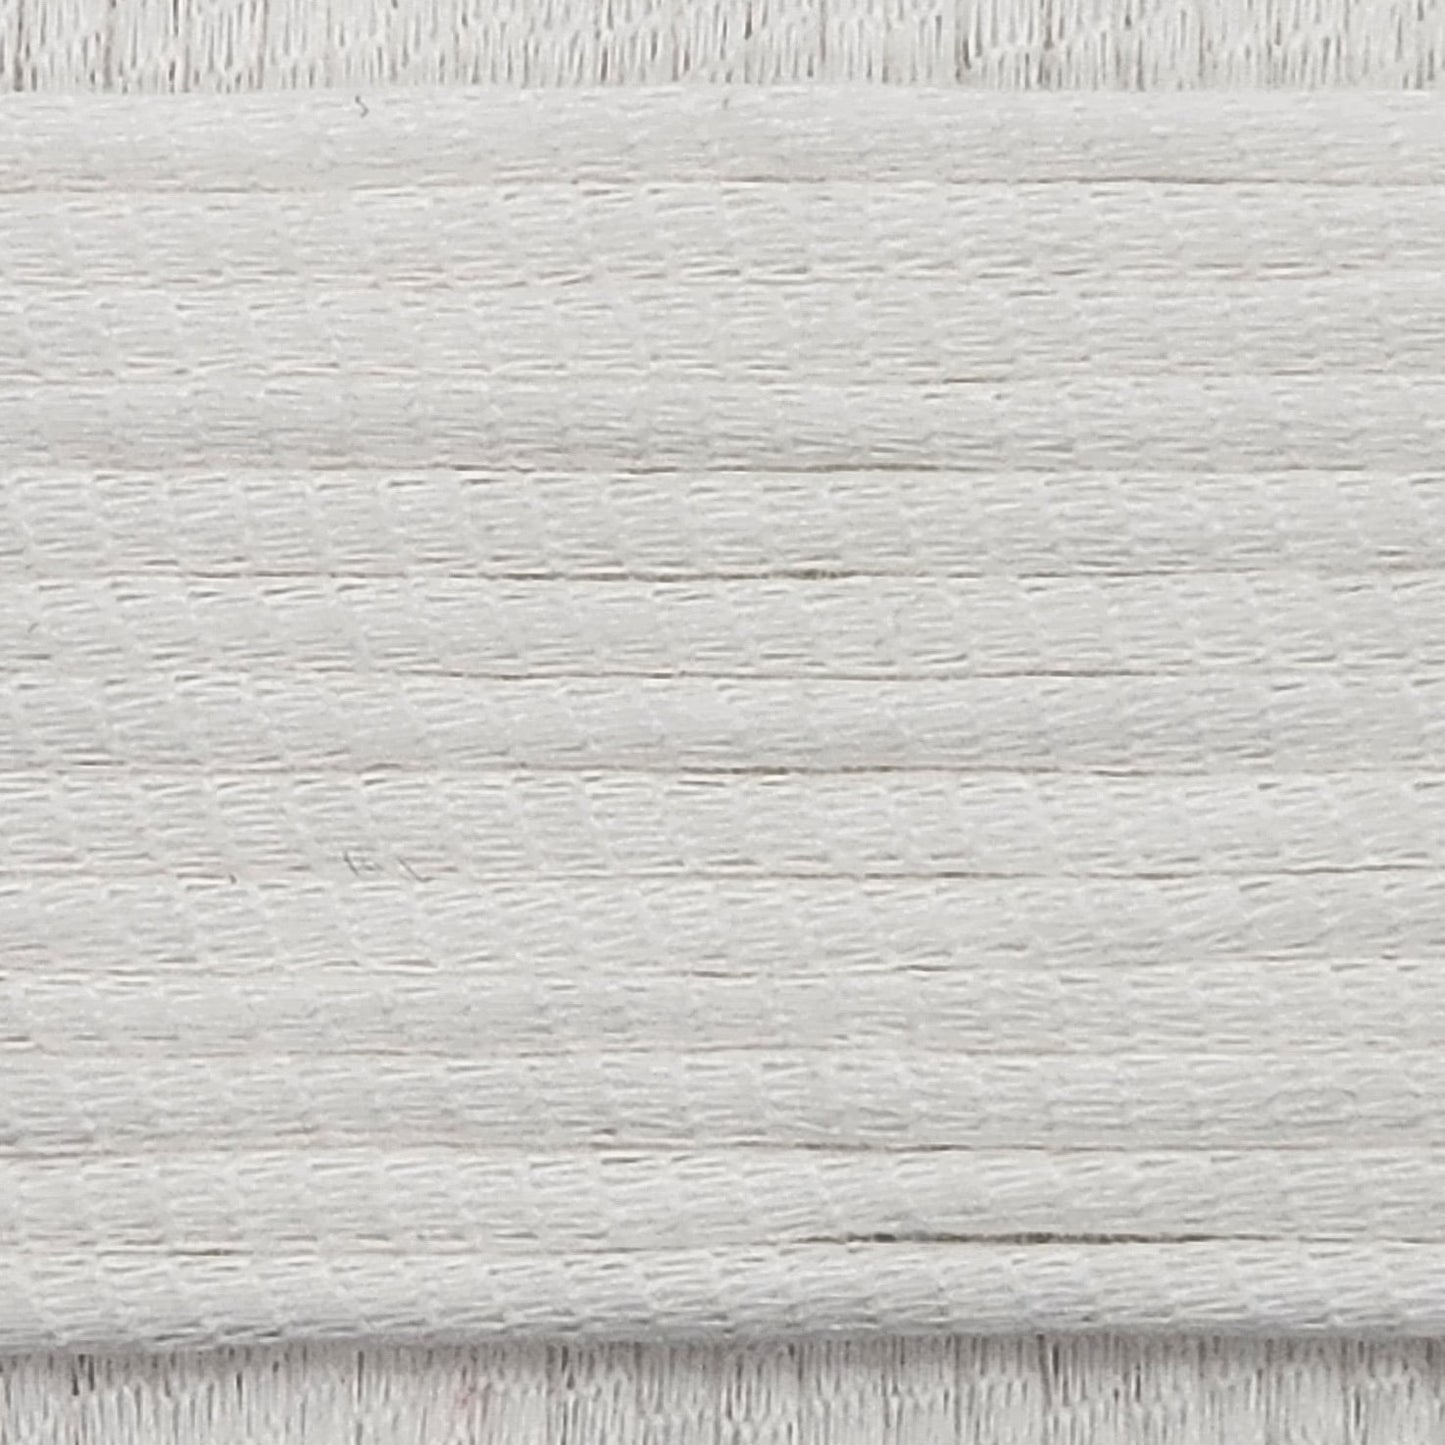 A close-up image showing the texture of a milky white coloured yarn that is friendly for crochet beginners.